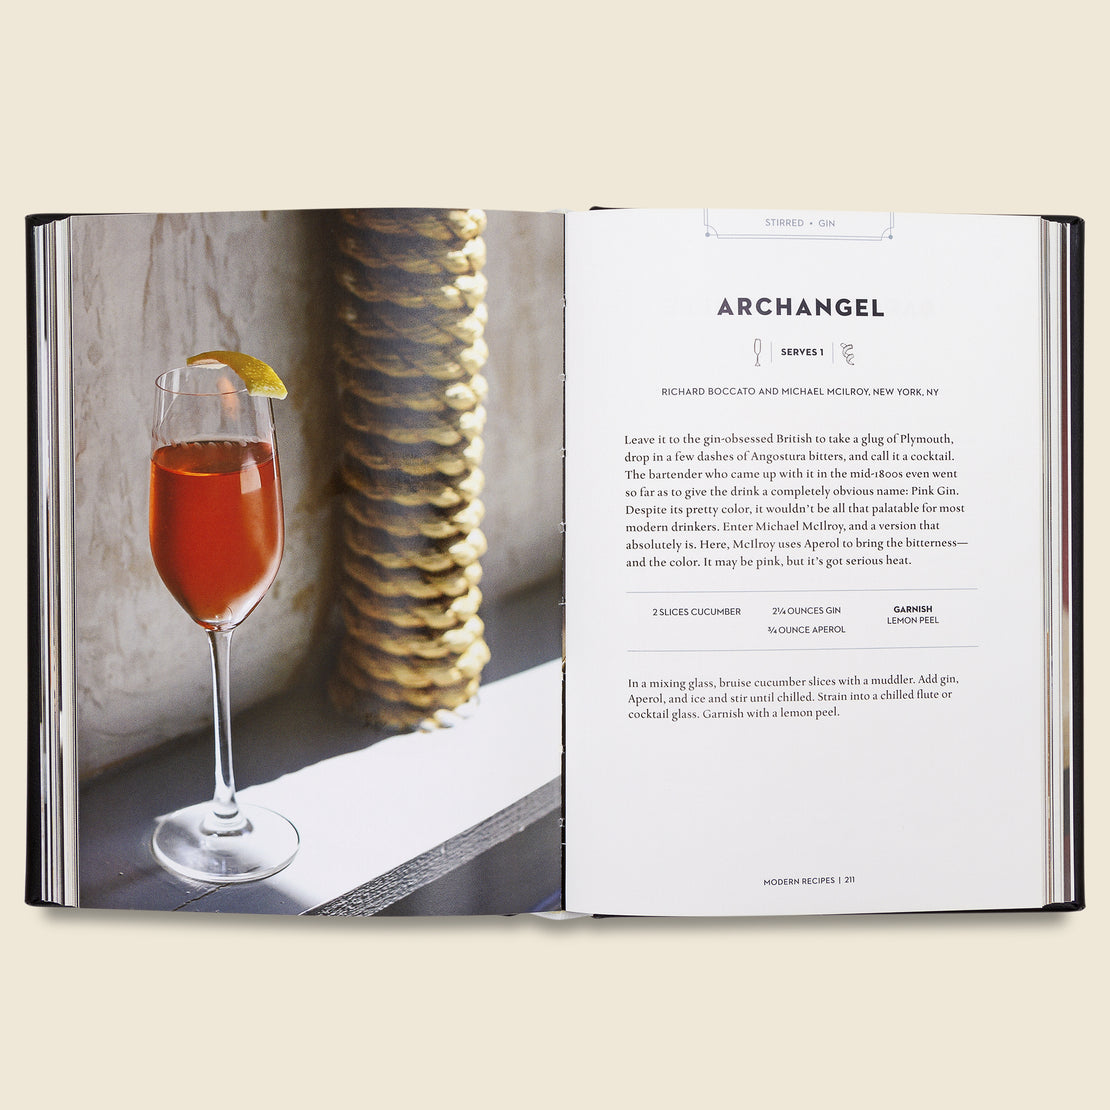 Professional Bartenders Mixology Book [COCKTAIL RECIPES] by TIANO